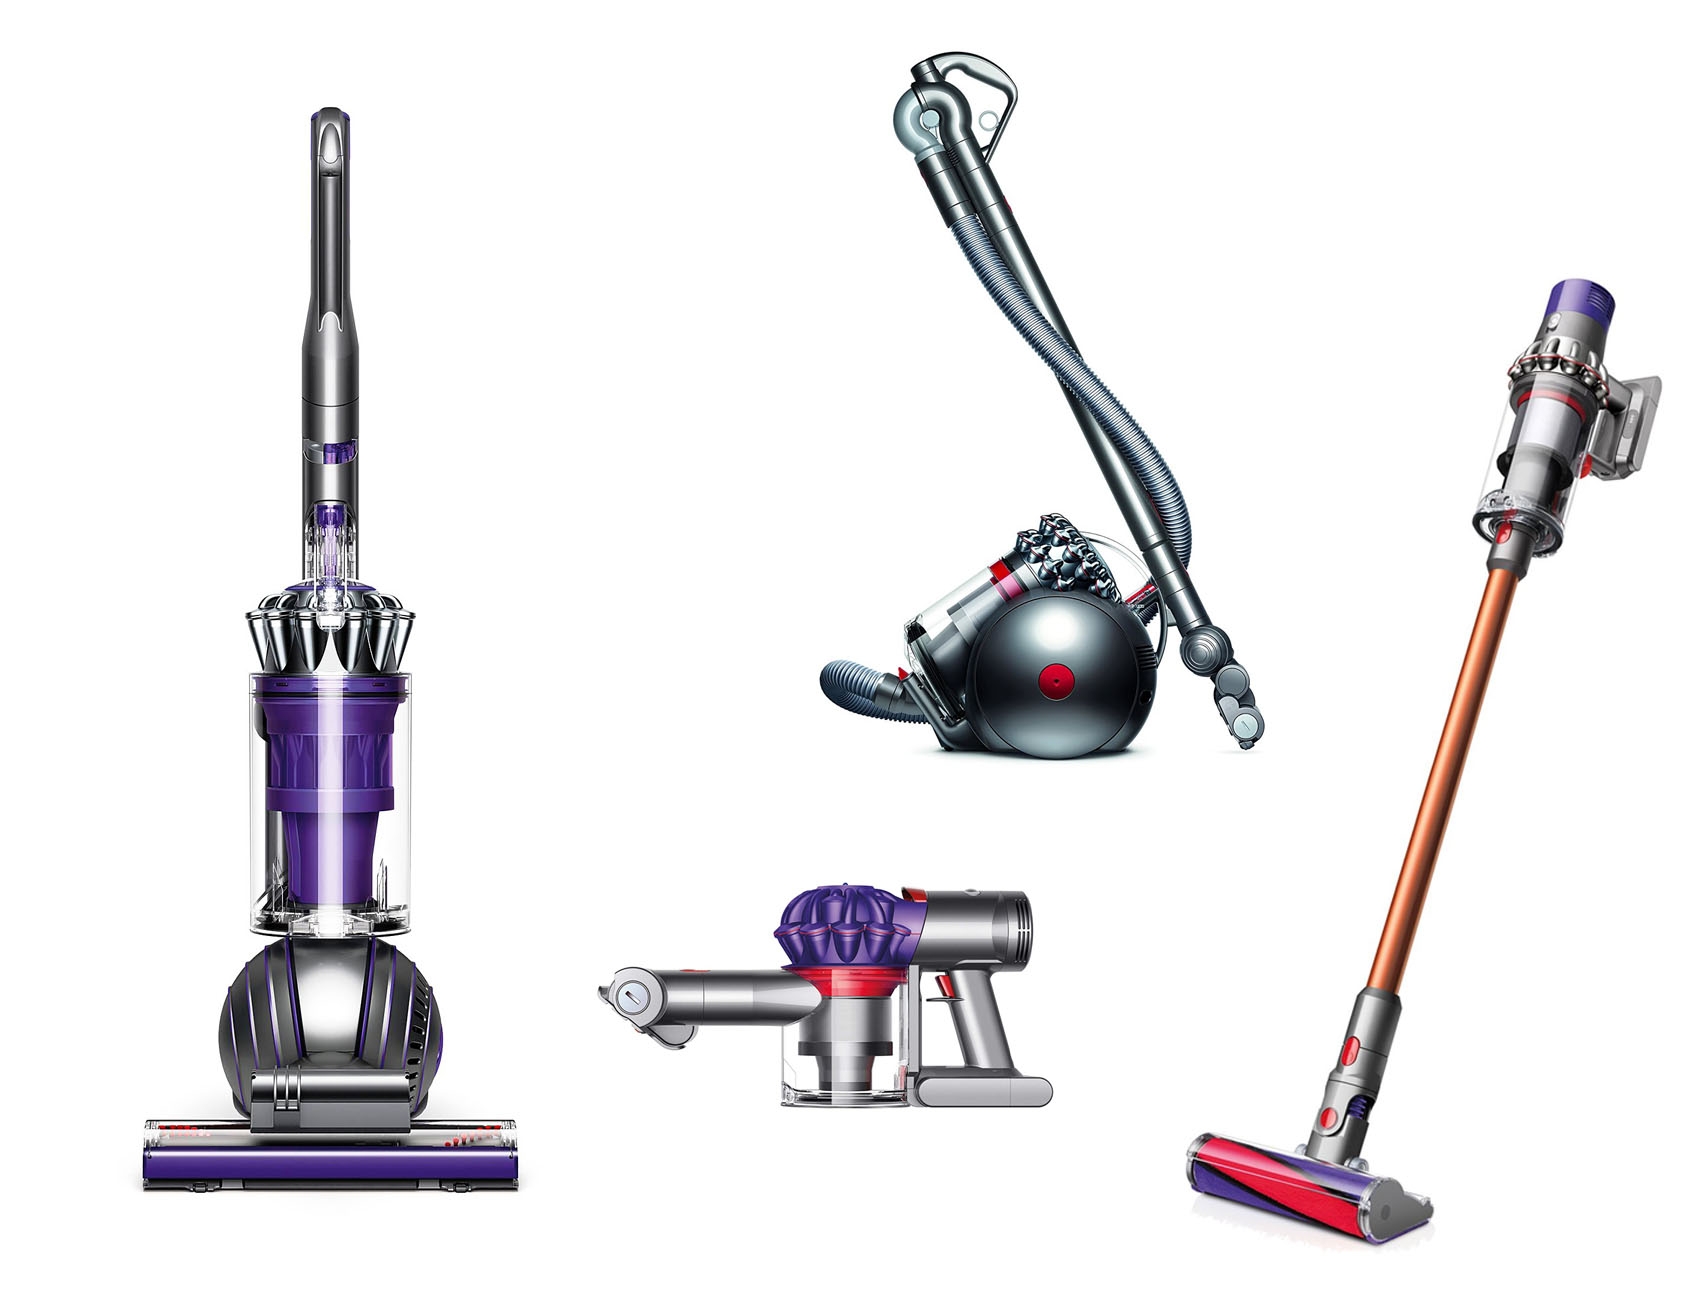 13 Best Dyson vacuums for 2021 – reviews and comparison charts